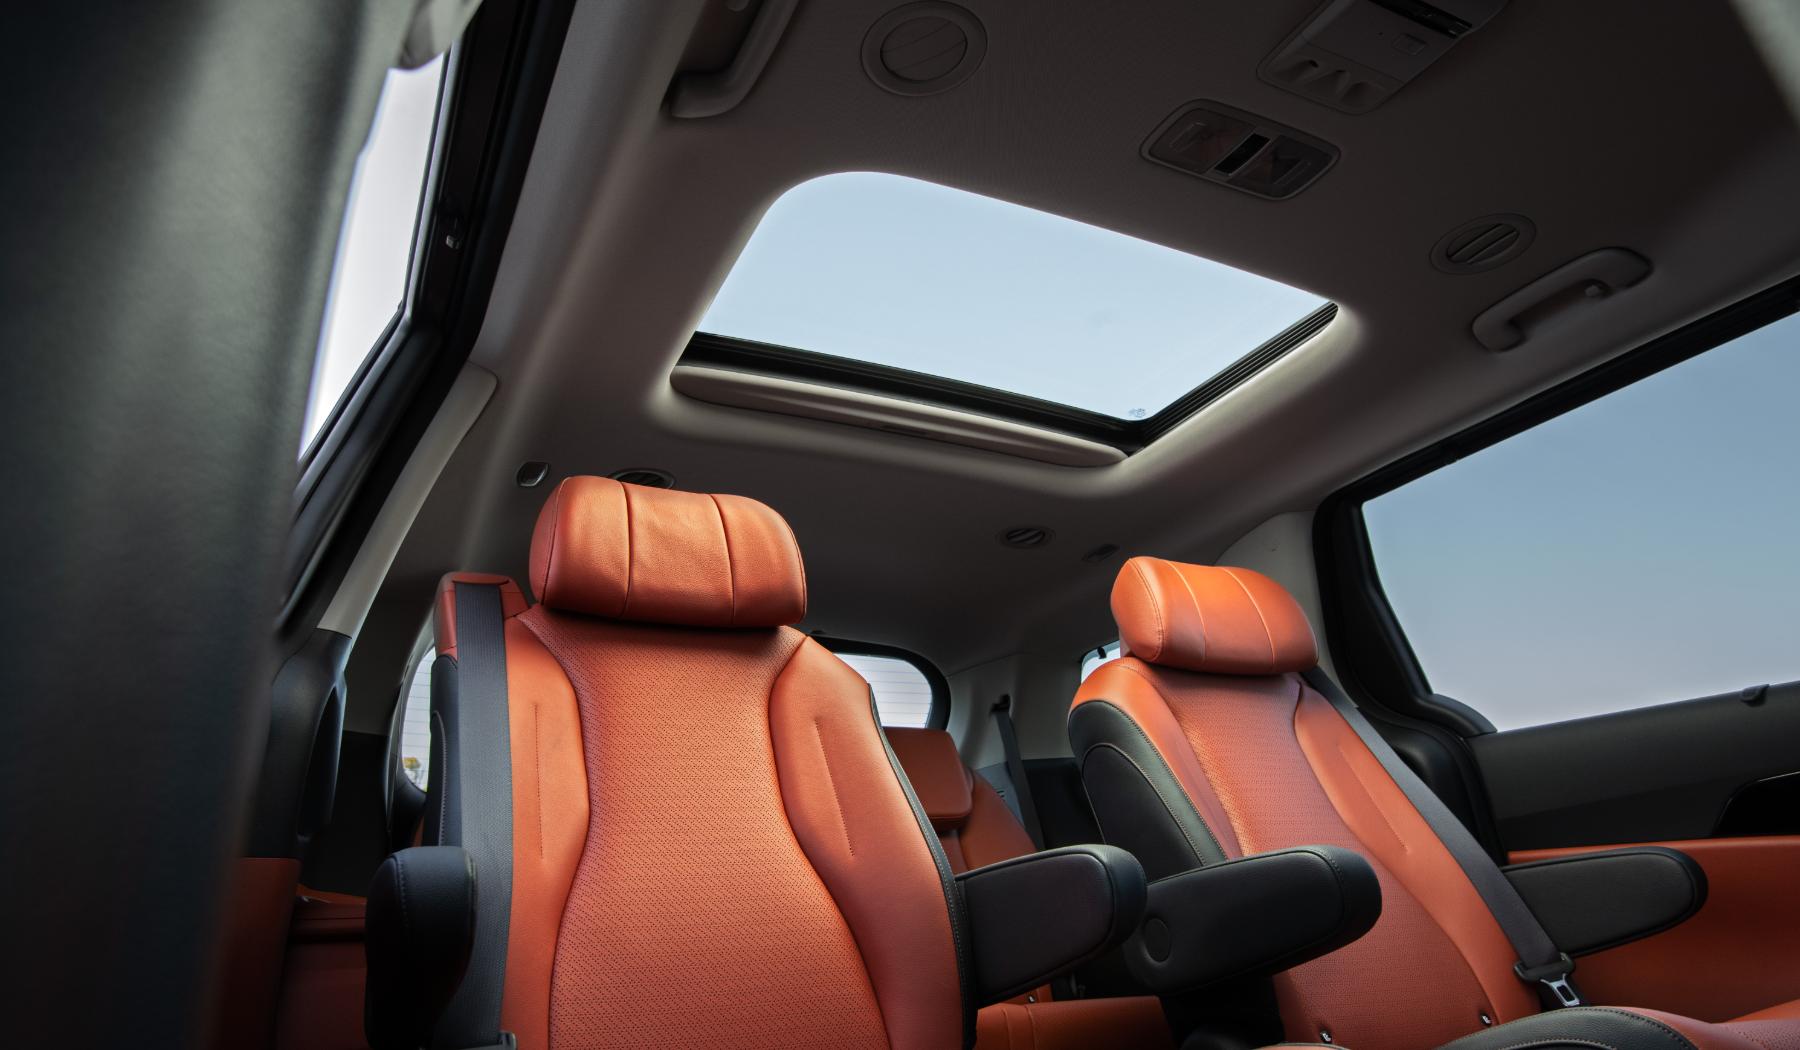 Step Inside the 2022 Kia Carnival and Discover Its Classy and Luxurious